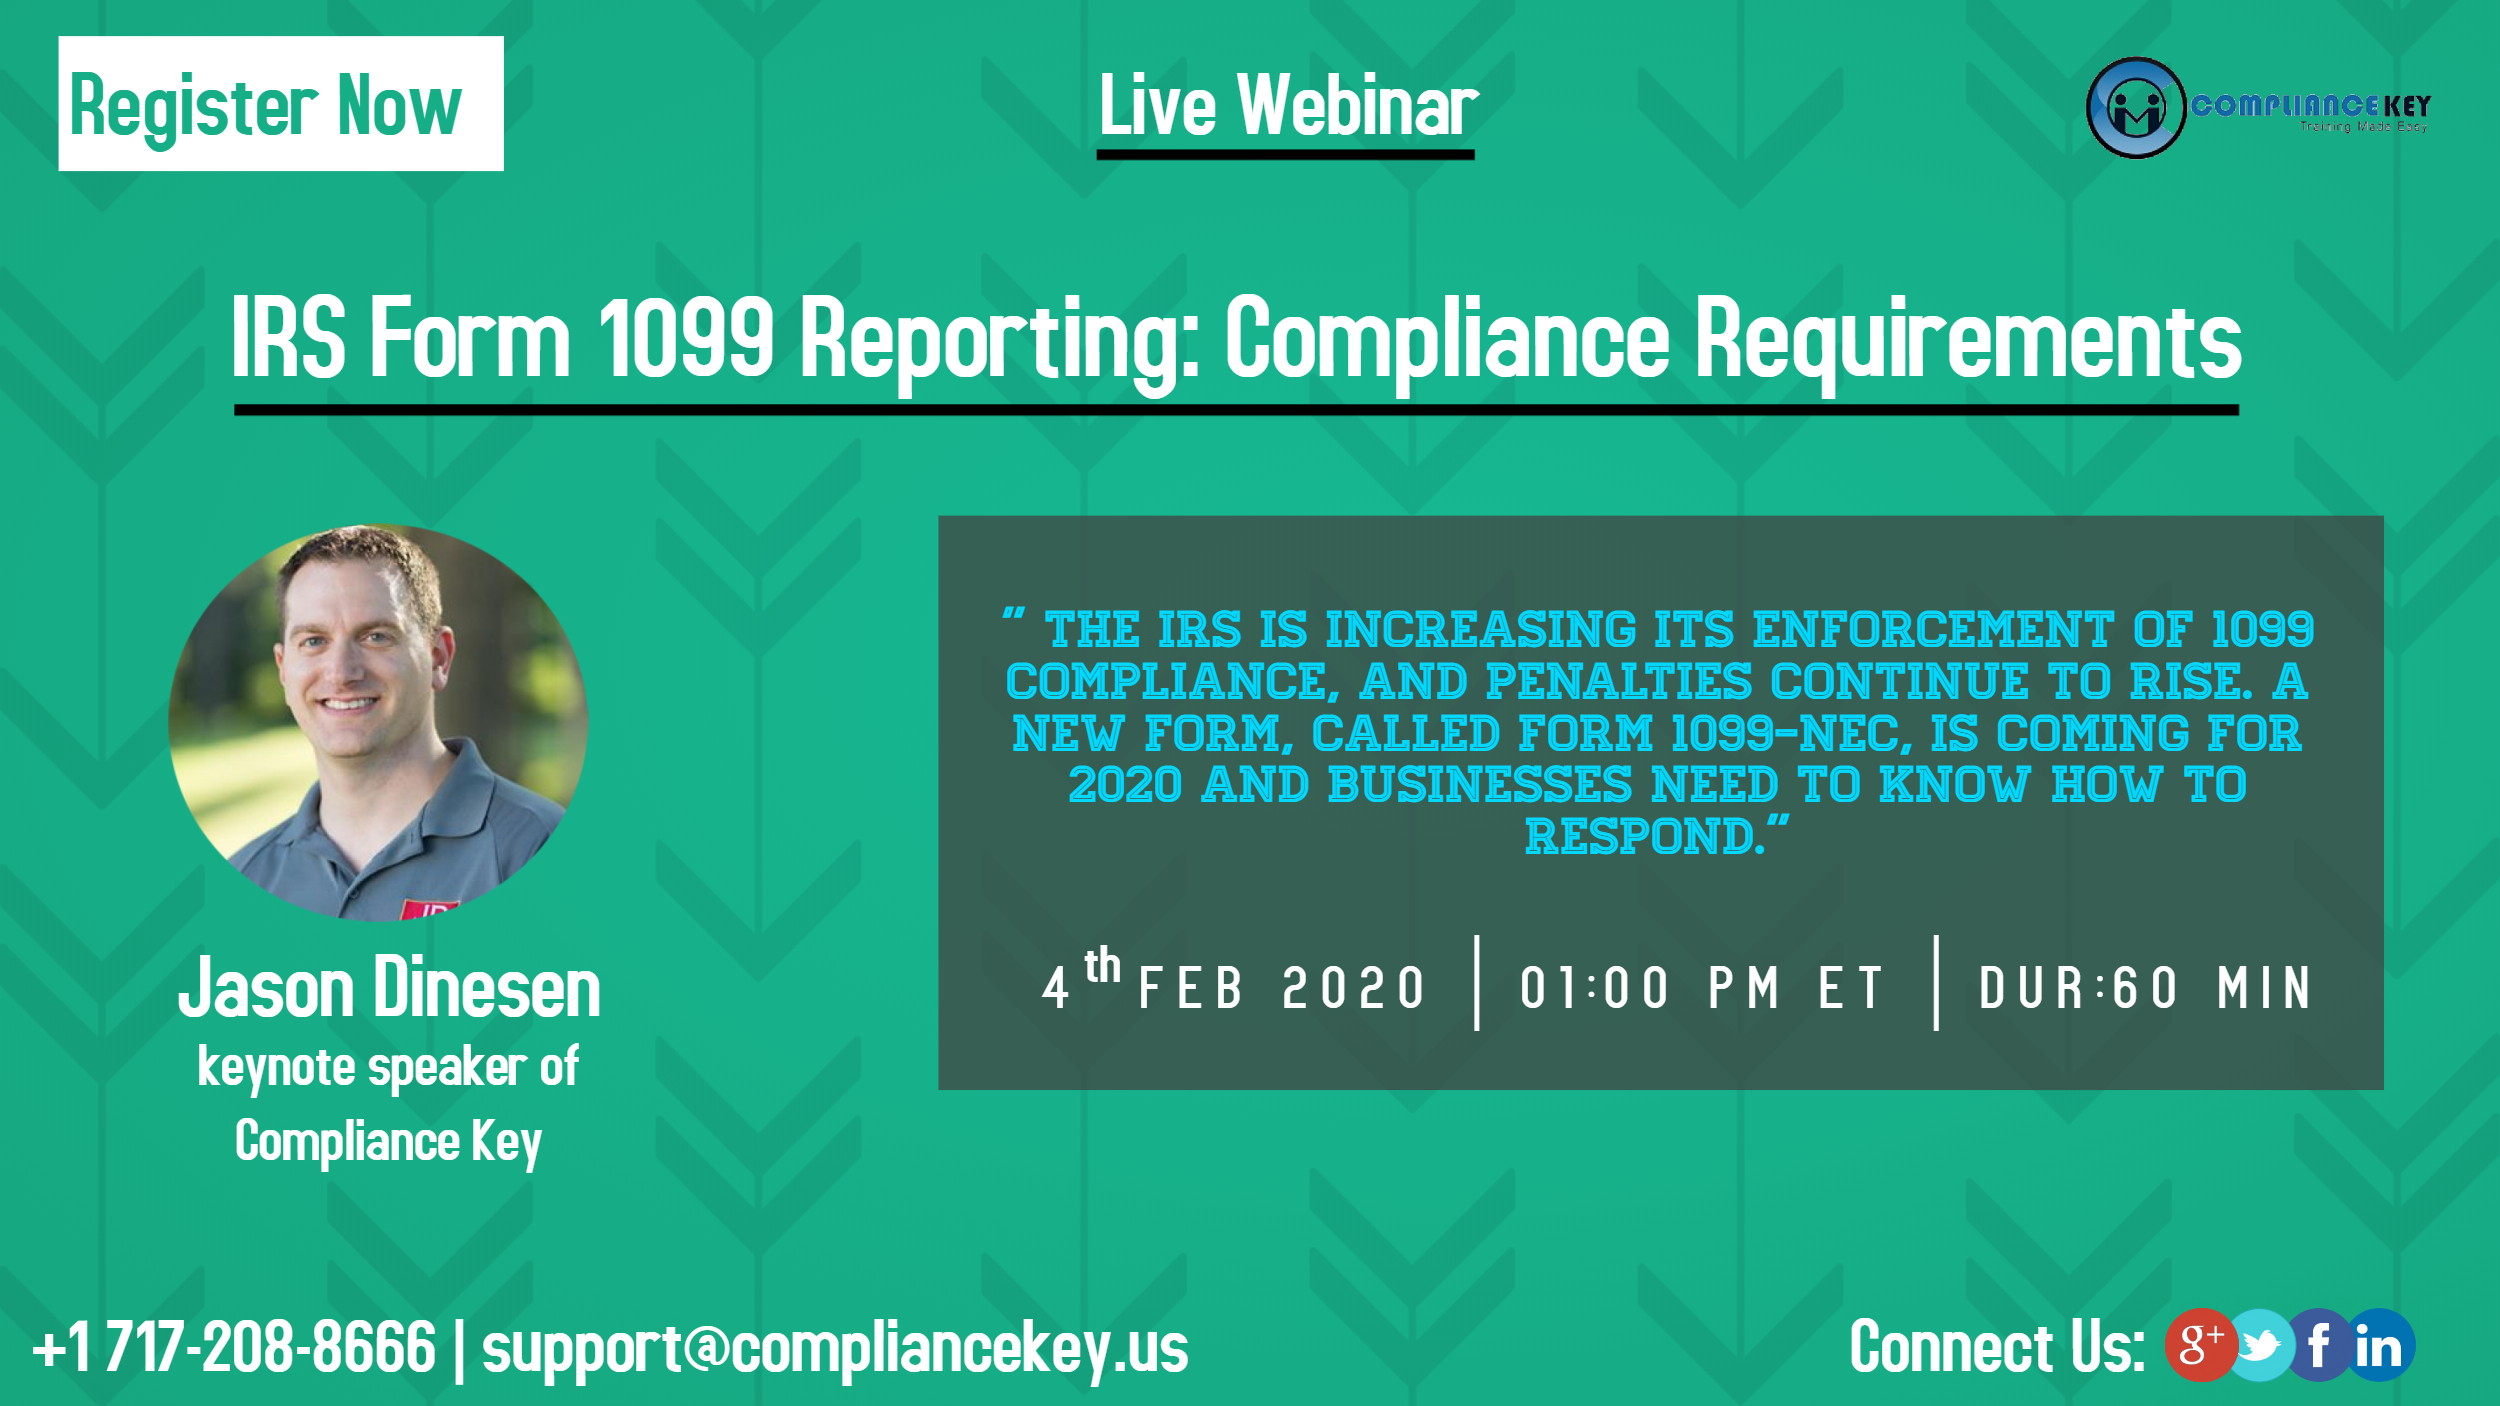 IRS Form 1099 Reporting: Compliance Requirements, Middletown, Delaware, United States